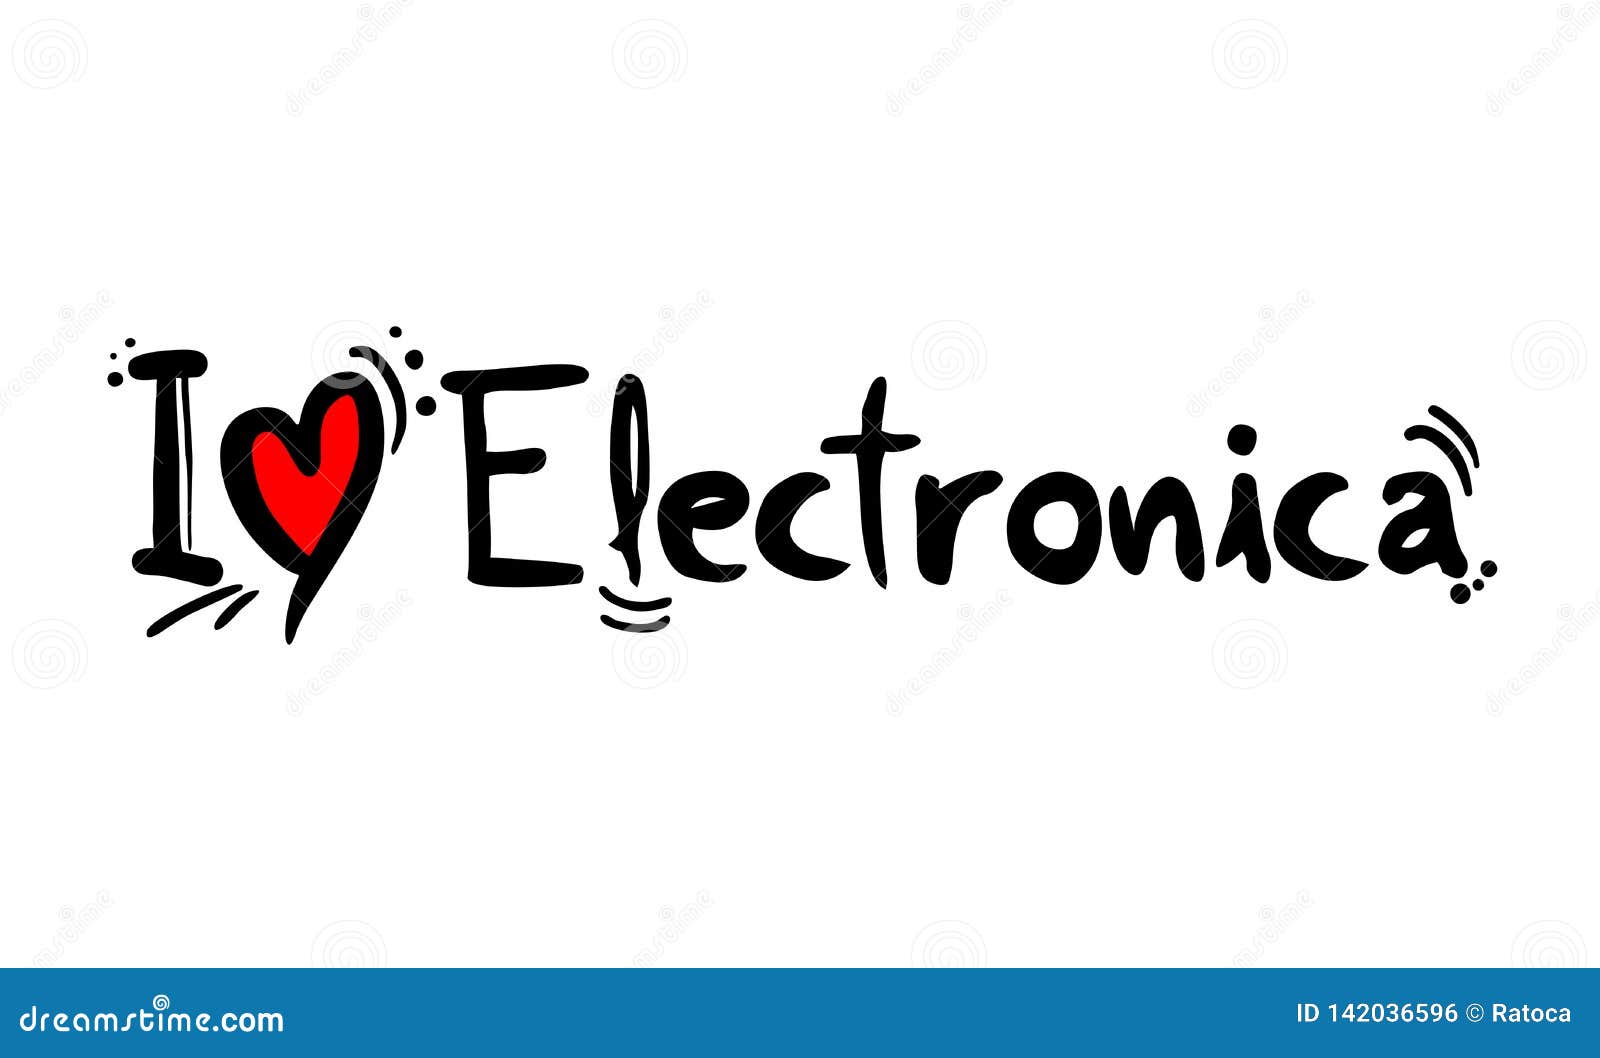 electronica music style love